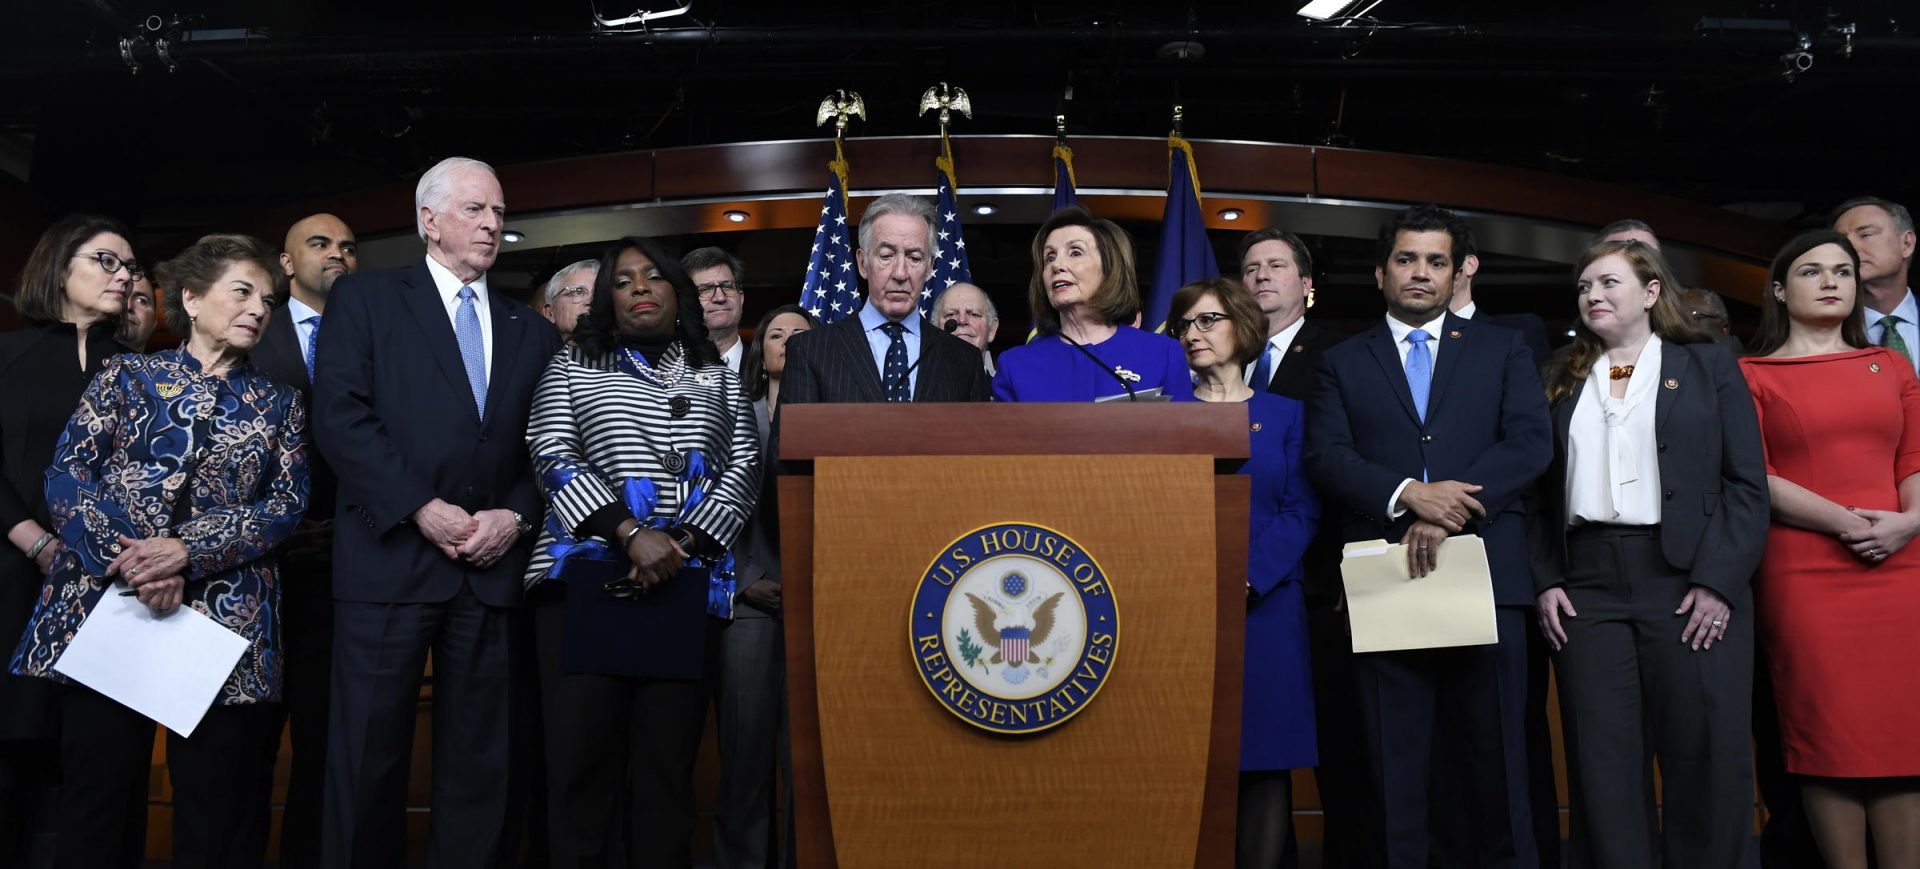 House Speaker Nancy Pelosi of Calif., accompanied by House Ways and Means Committee Chairman Richard Neal, D-Mass., speaks at a news conference on Capitol Hill in Washington, Tuesday, Dec. 10, 2019, on Capitol Hill in Washington.